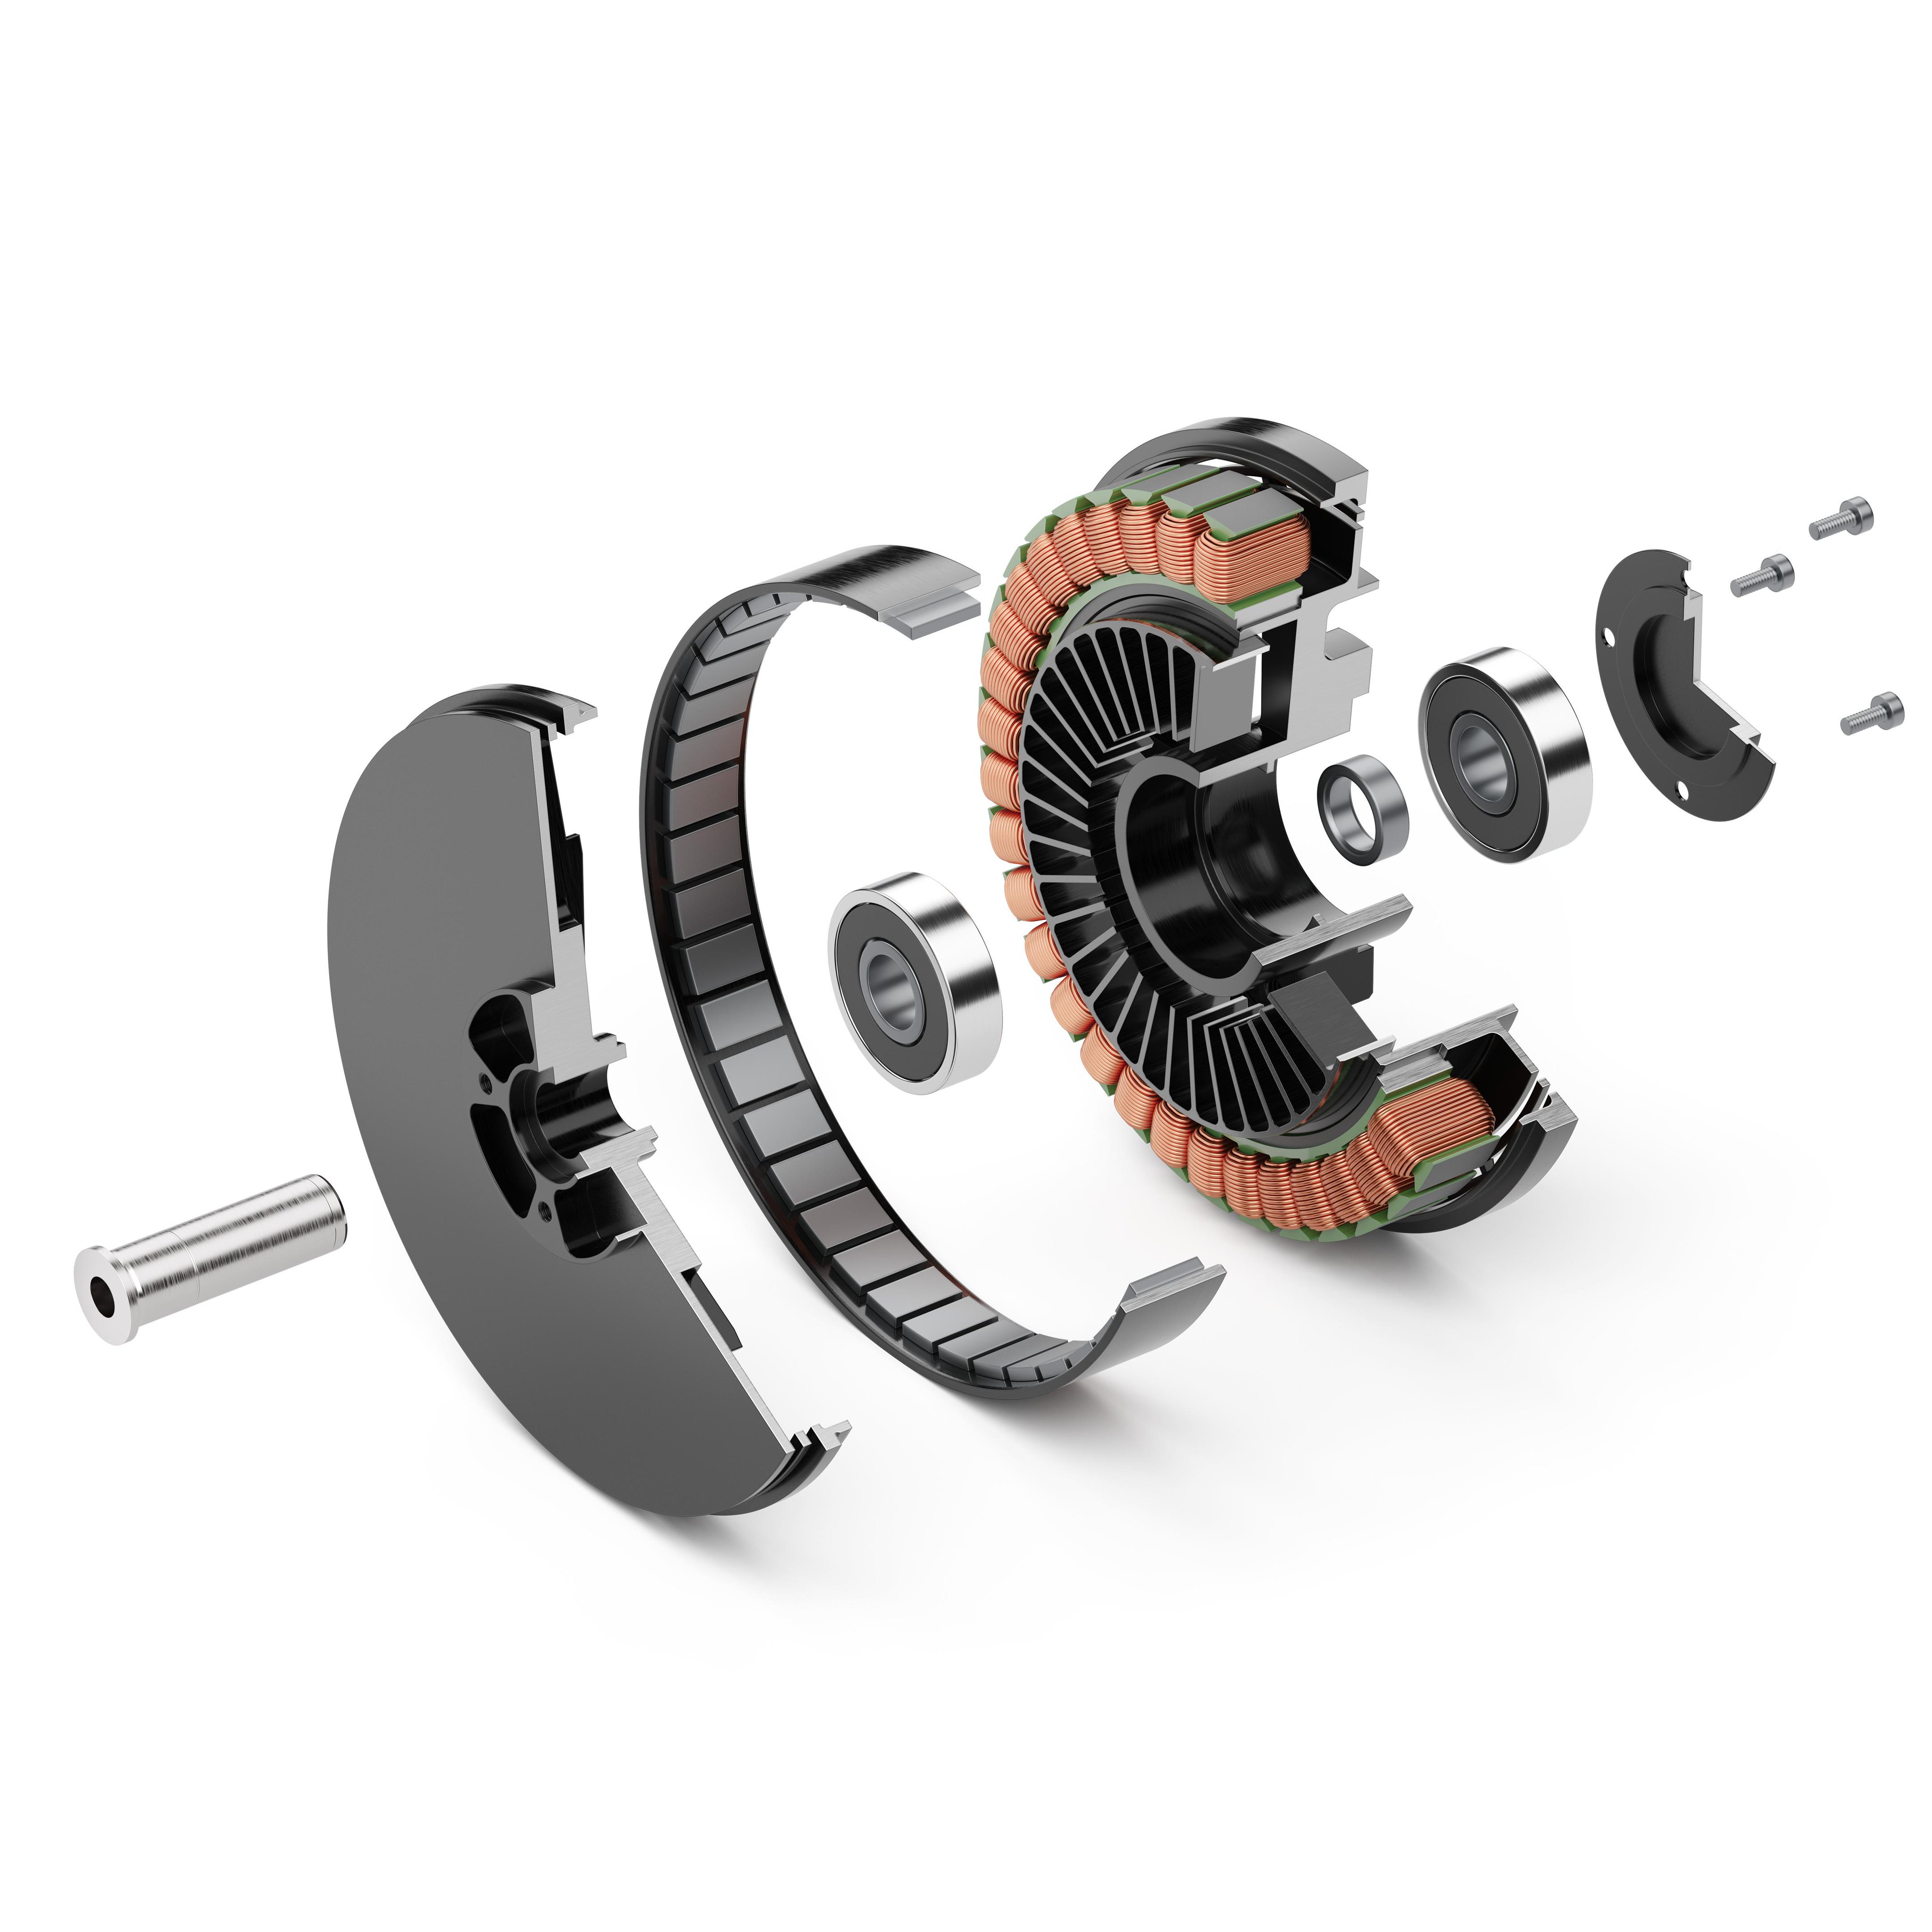 Online shop for high precise drive systems by maxon